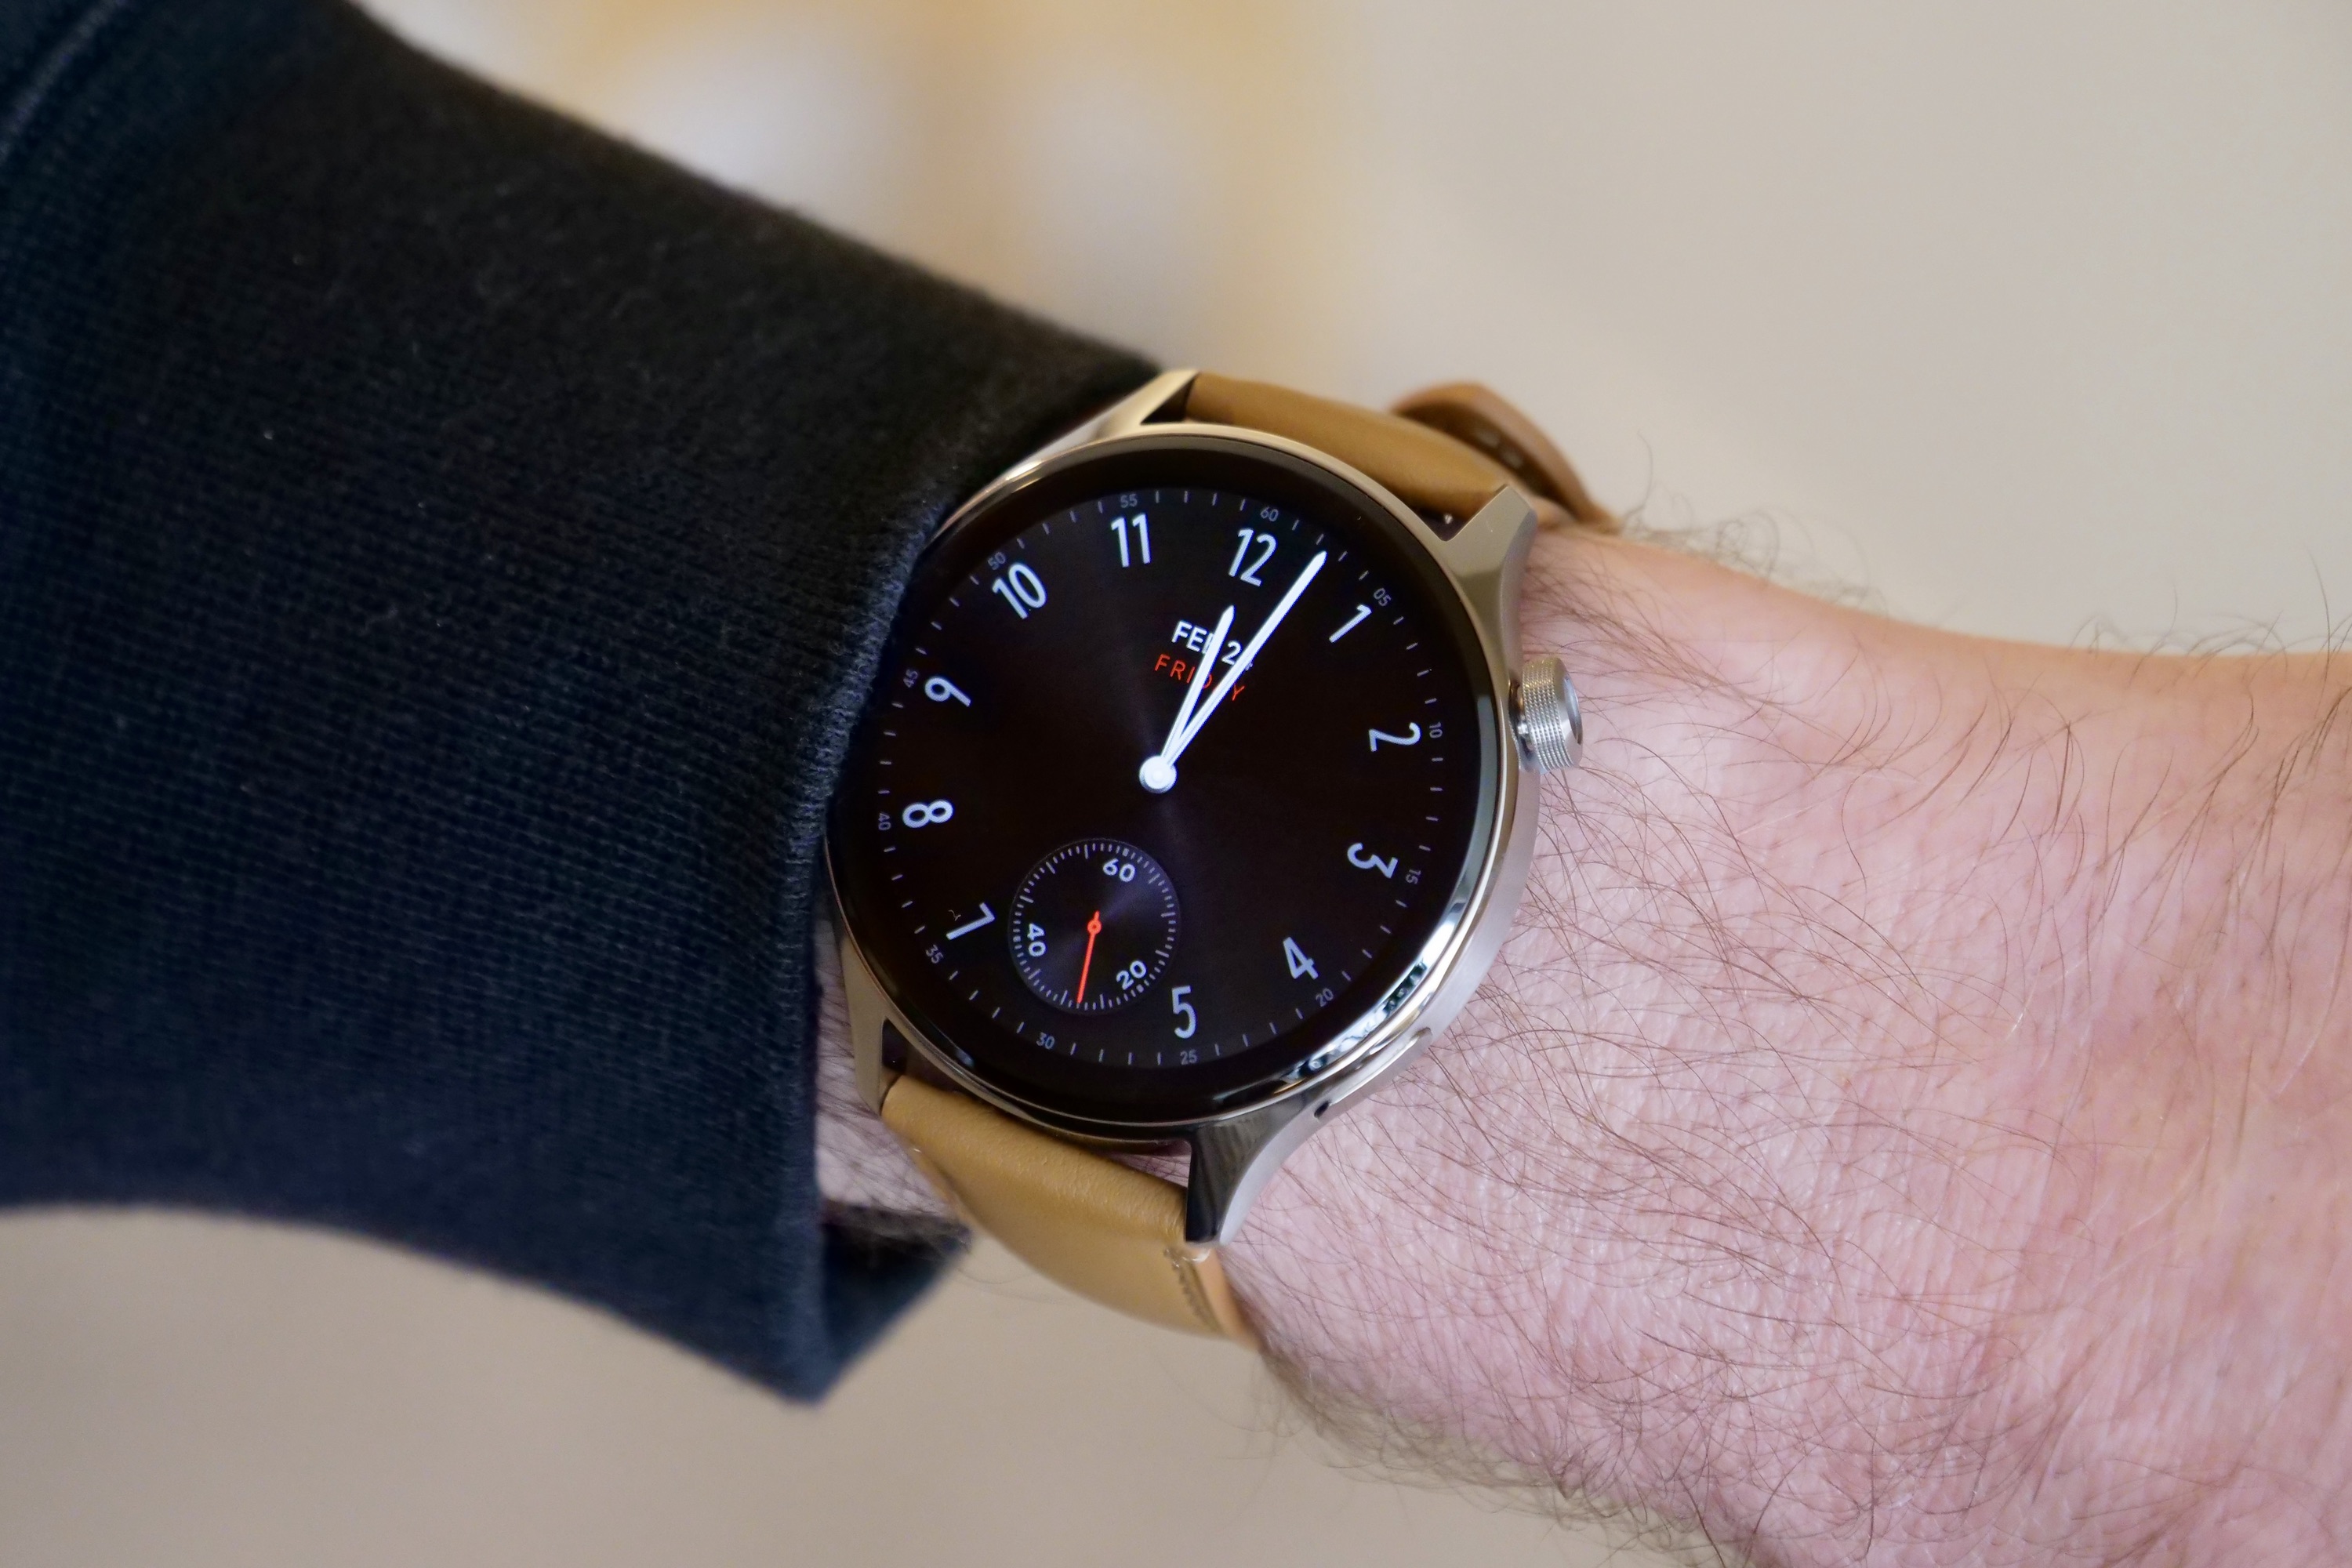 The Xiaomi Watch S1 Pro worn on a person's wrist.